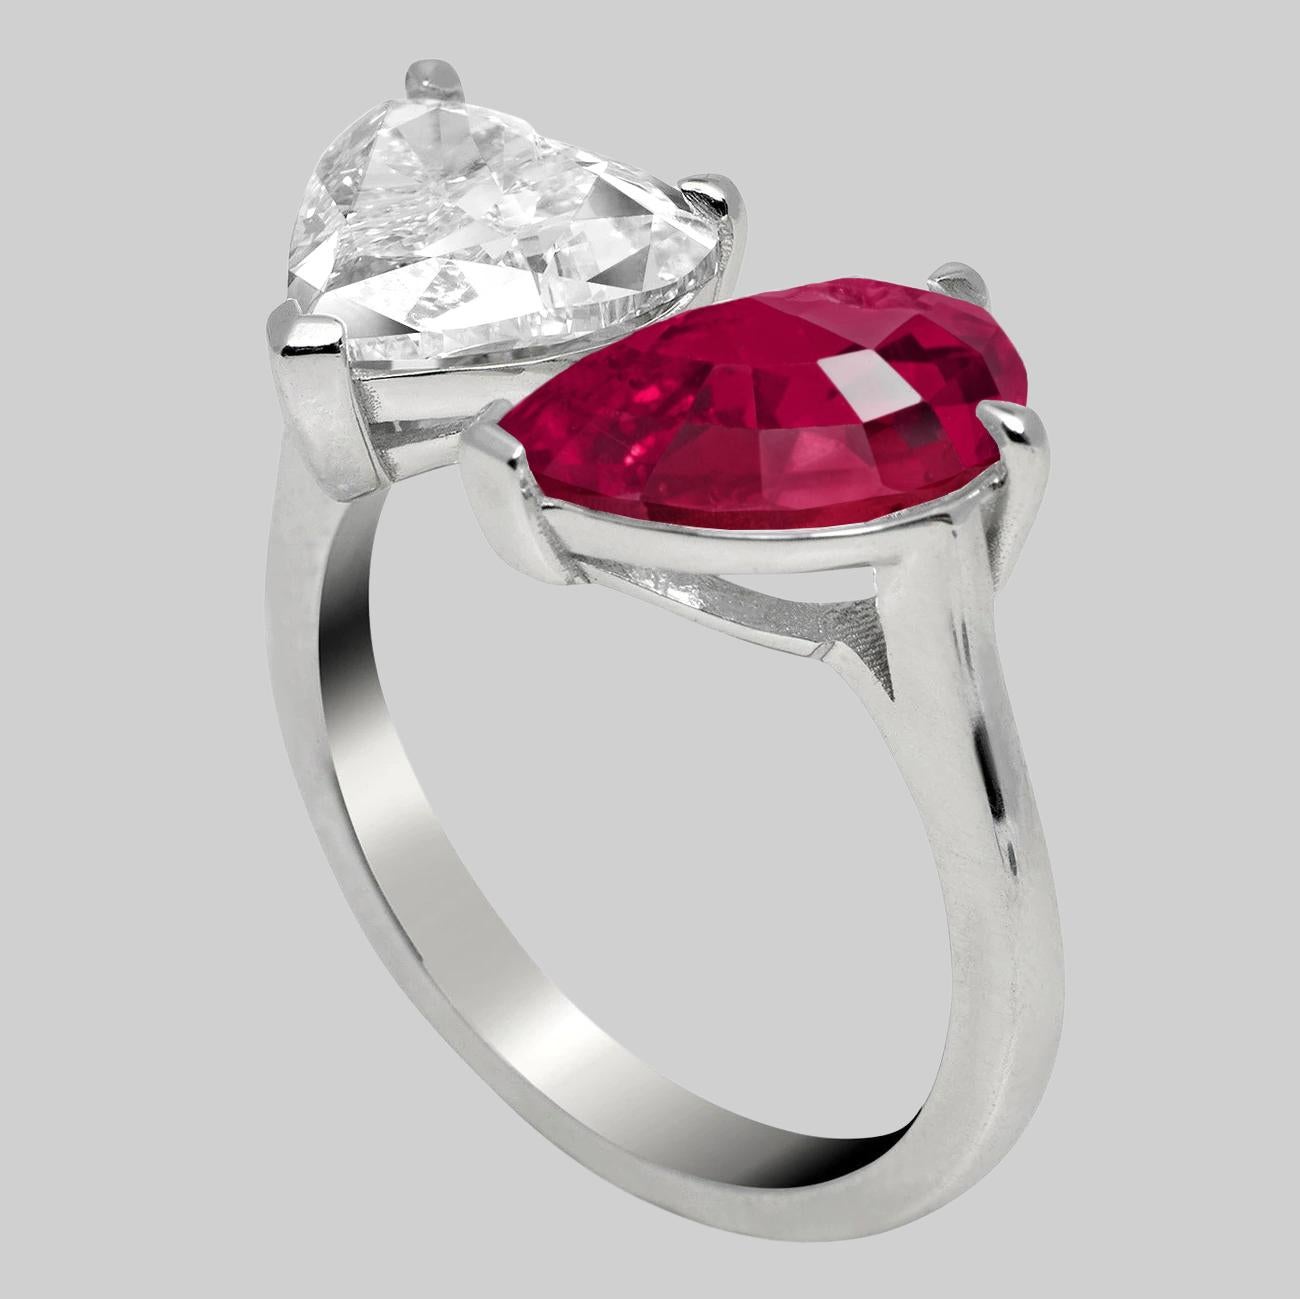 An amazing bypass moi & toi platinum ring set with a 2 carat heart shape diamond certified by GIA and a 3 carat IGI Antwerp pear cut ruby platinum ring.